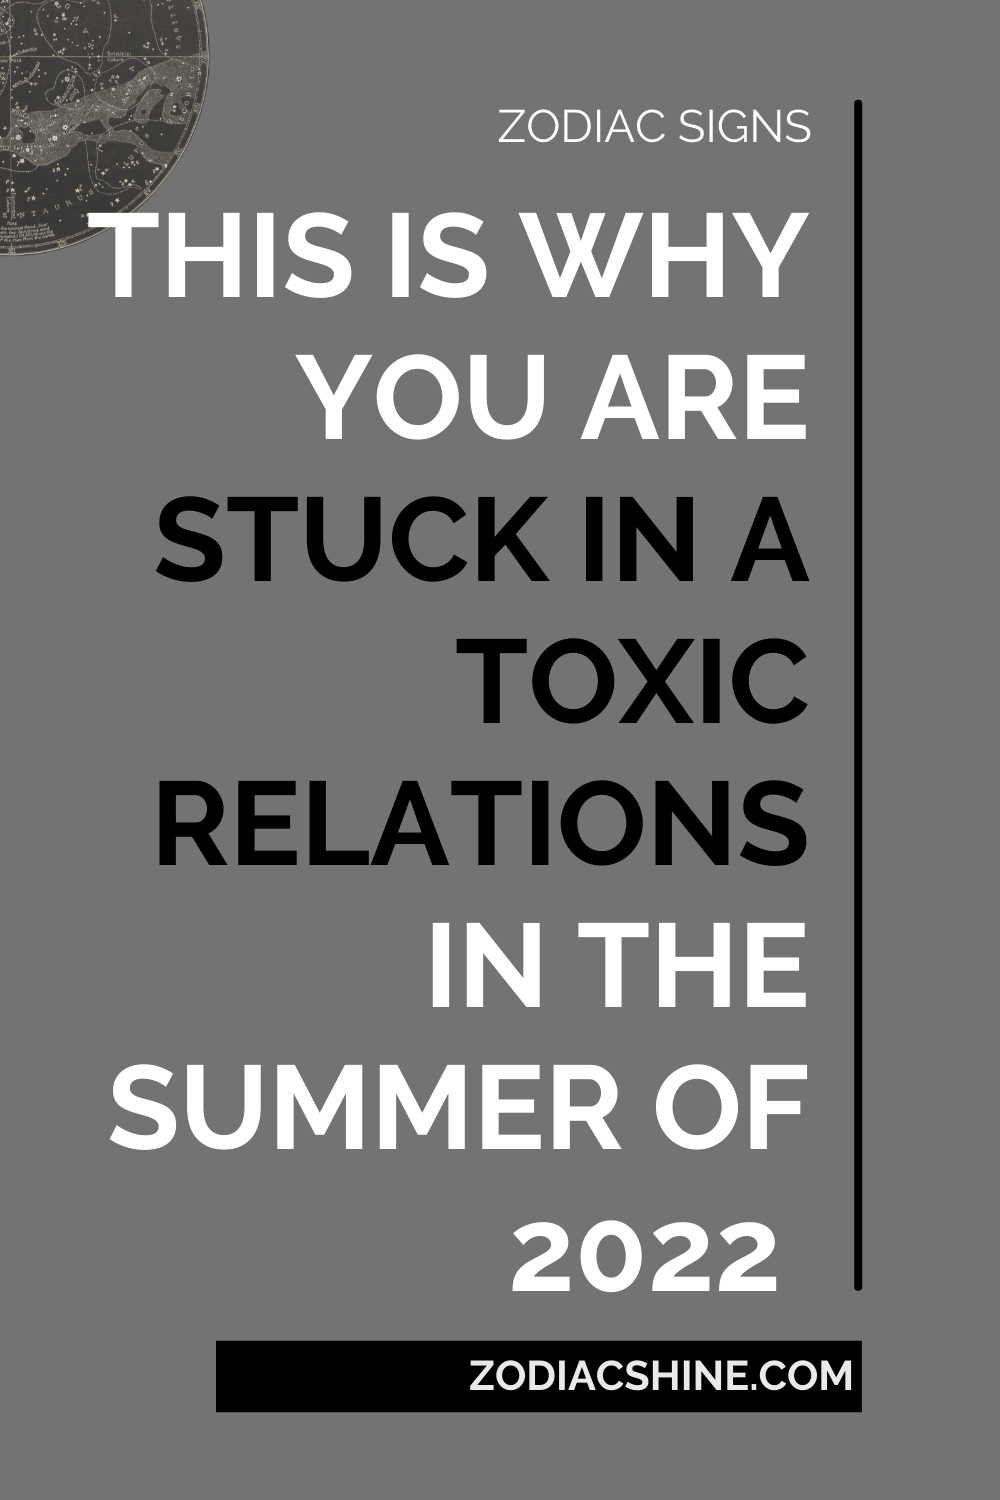 This Is Why You Are Stuck In A Toxic Relationship In The Summer Of 2022 According To Your Zodiac Sign